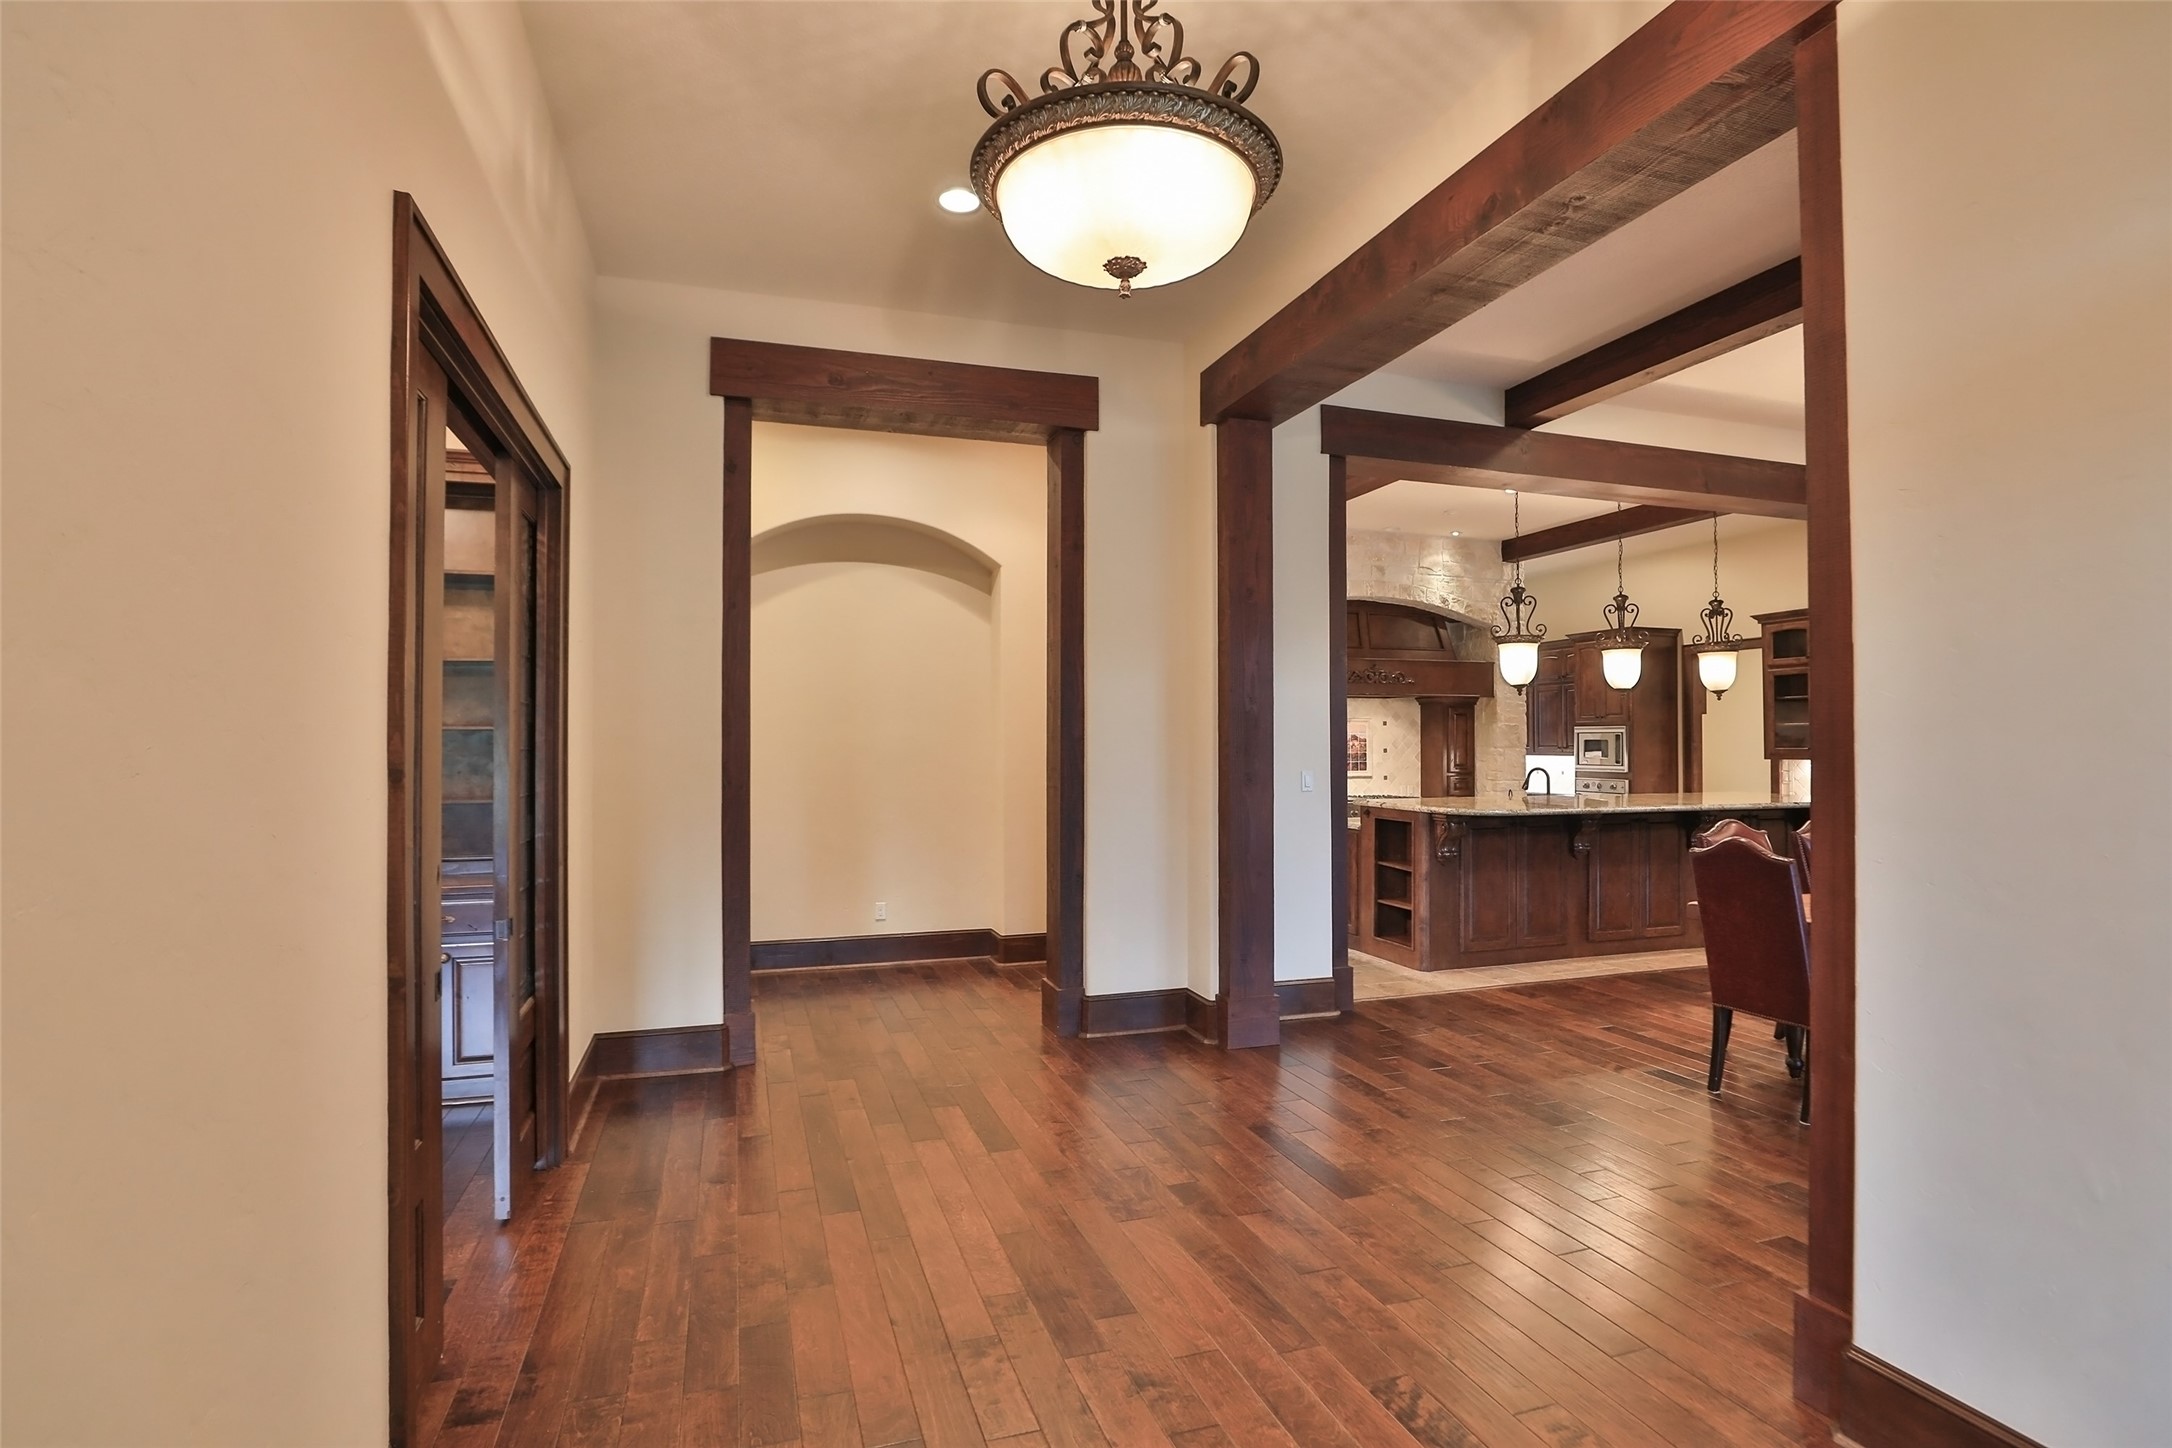 Enter the wide foyer to this home. You will see tremendous wood work and custom cabinets throughout the house. Beautiful door headers add a rustic style. Stunning hard wood floors throughout.